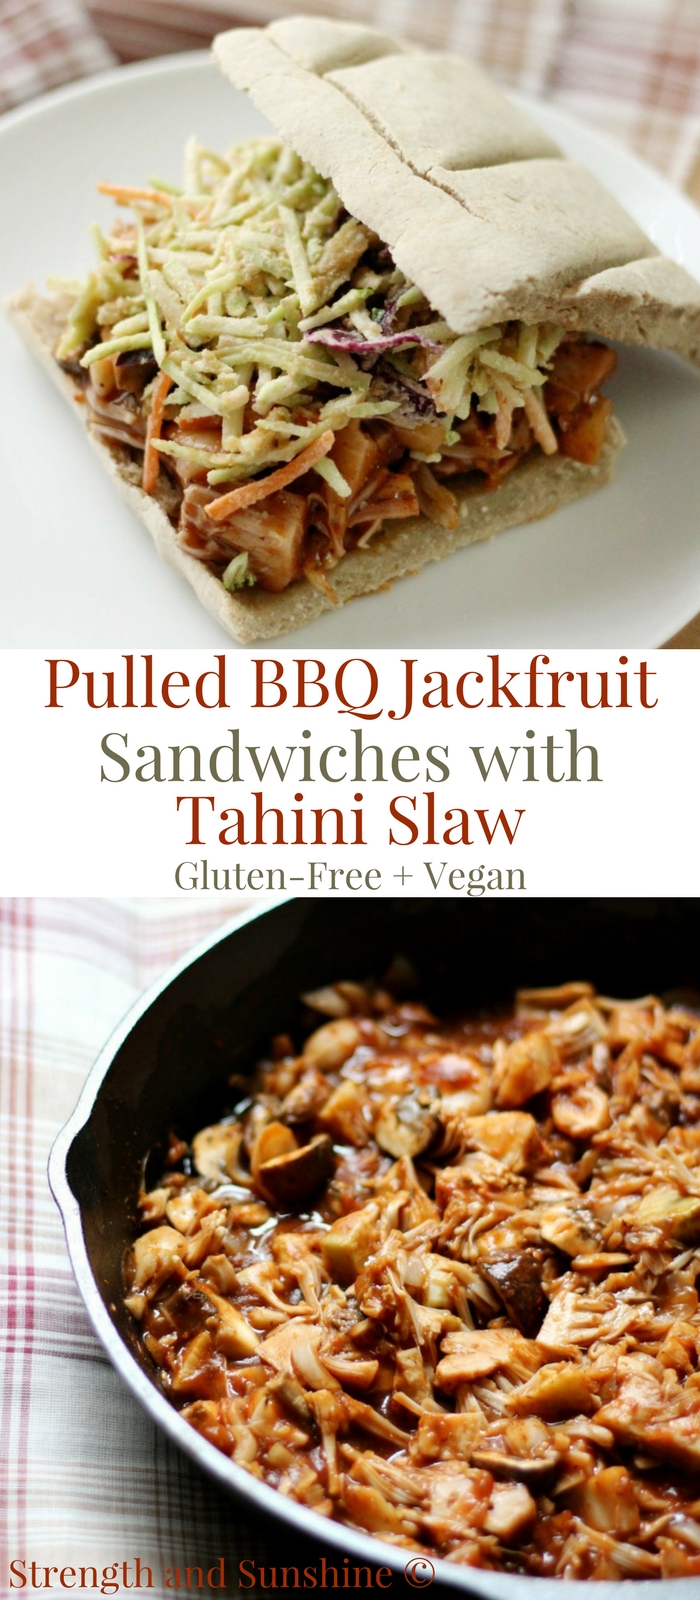 Pulled BBQ Jackfruit Sandwiches with Tahini Slaw (Gluten-Free, Vegan) | Strength and Sunshine @RebeccaGF666 A healthy & delicious meatless recipe that will have you forgetting about the meat! Pulled BBQ Jackfruit Sandwiches with Tahini Slaw that are gluten-free, vegan, & top-8 allergy-free! Great for a quick & easy plant-based weeknight dinner! #jackfruit #bbq #sandwiches #glutenfree #vegan